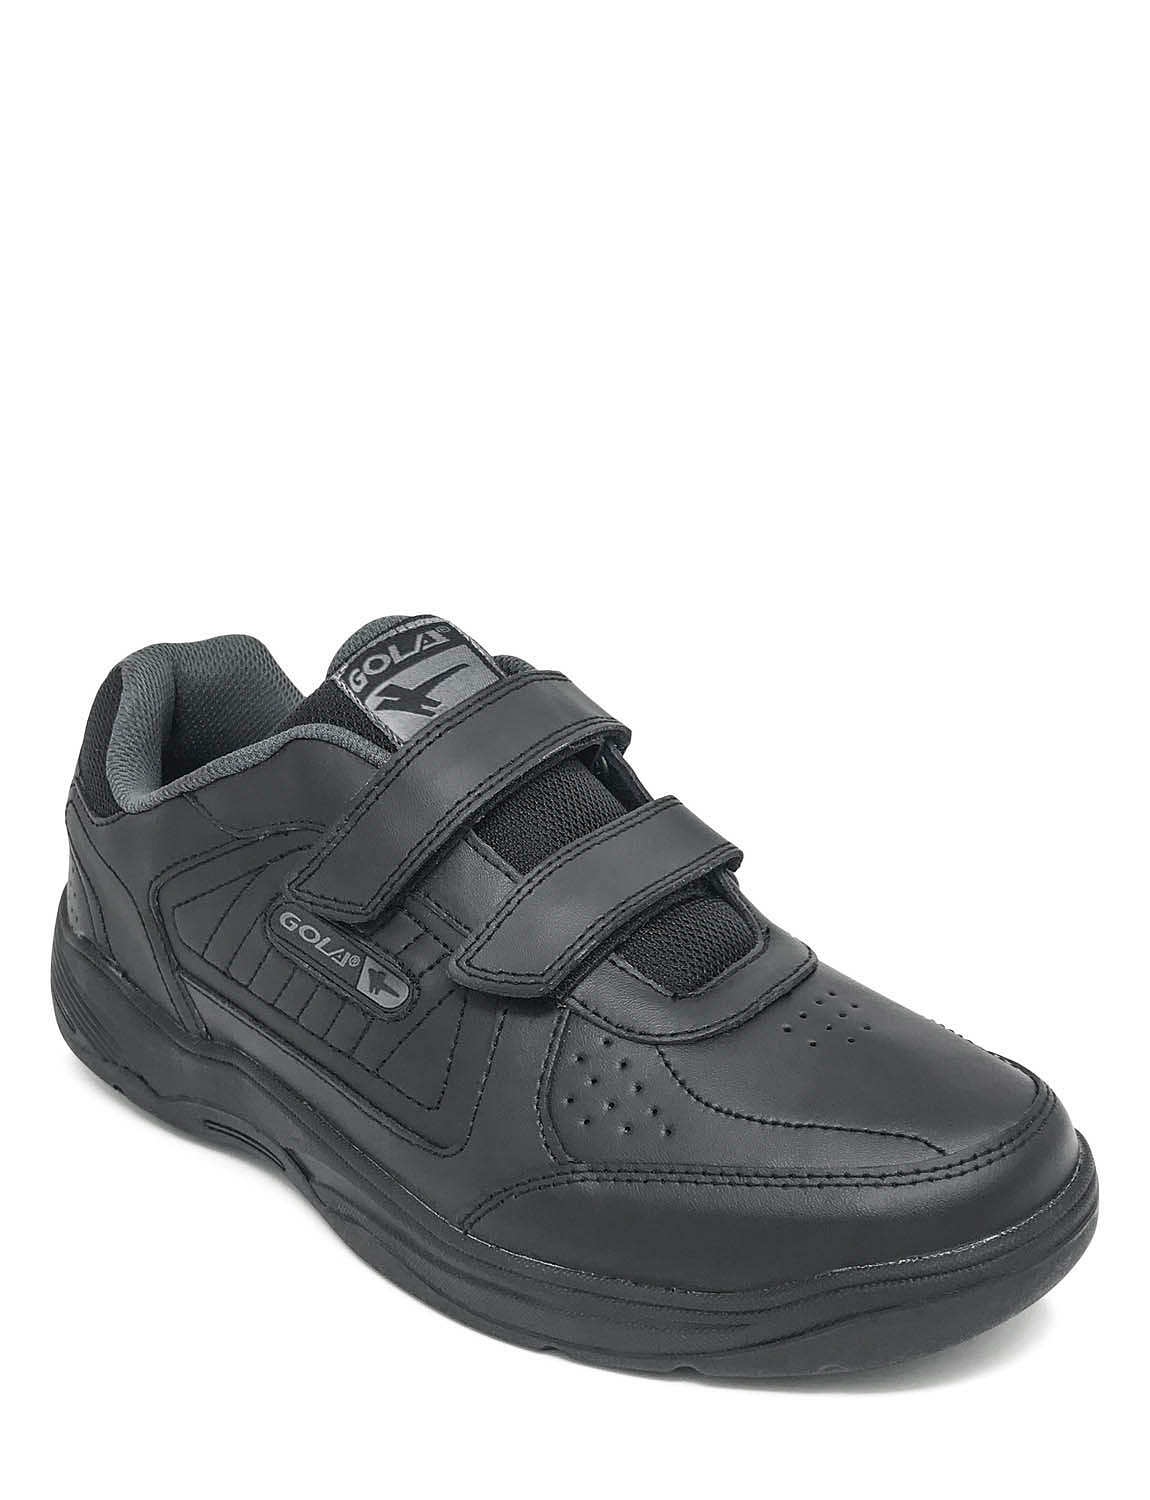 Gola Wide Fit Leather Touch Fasten Trainer | Chums